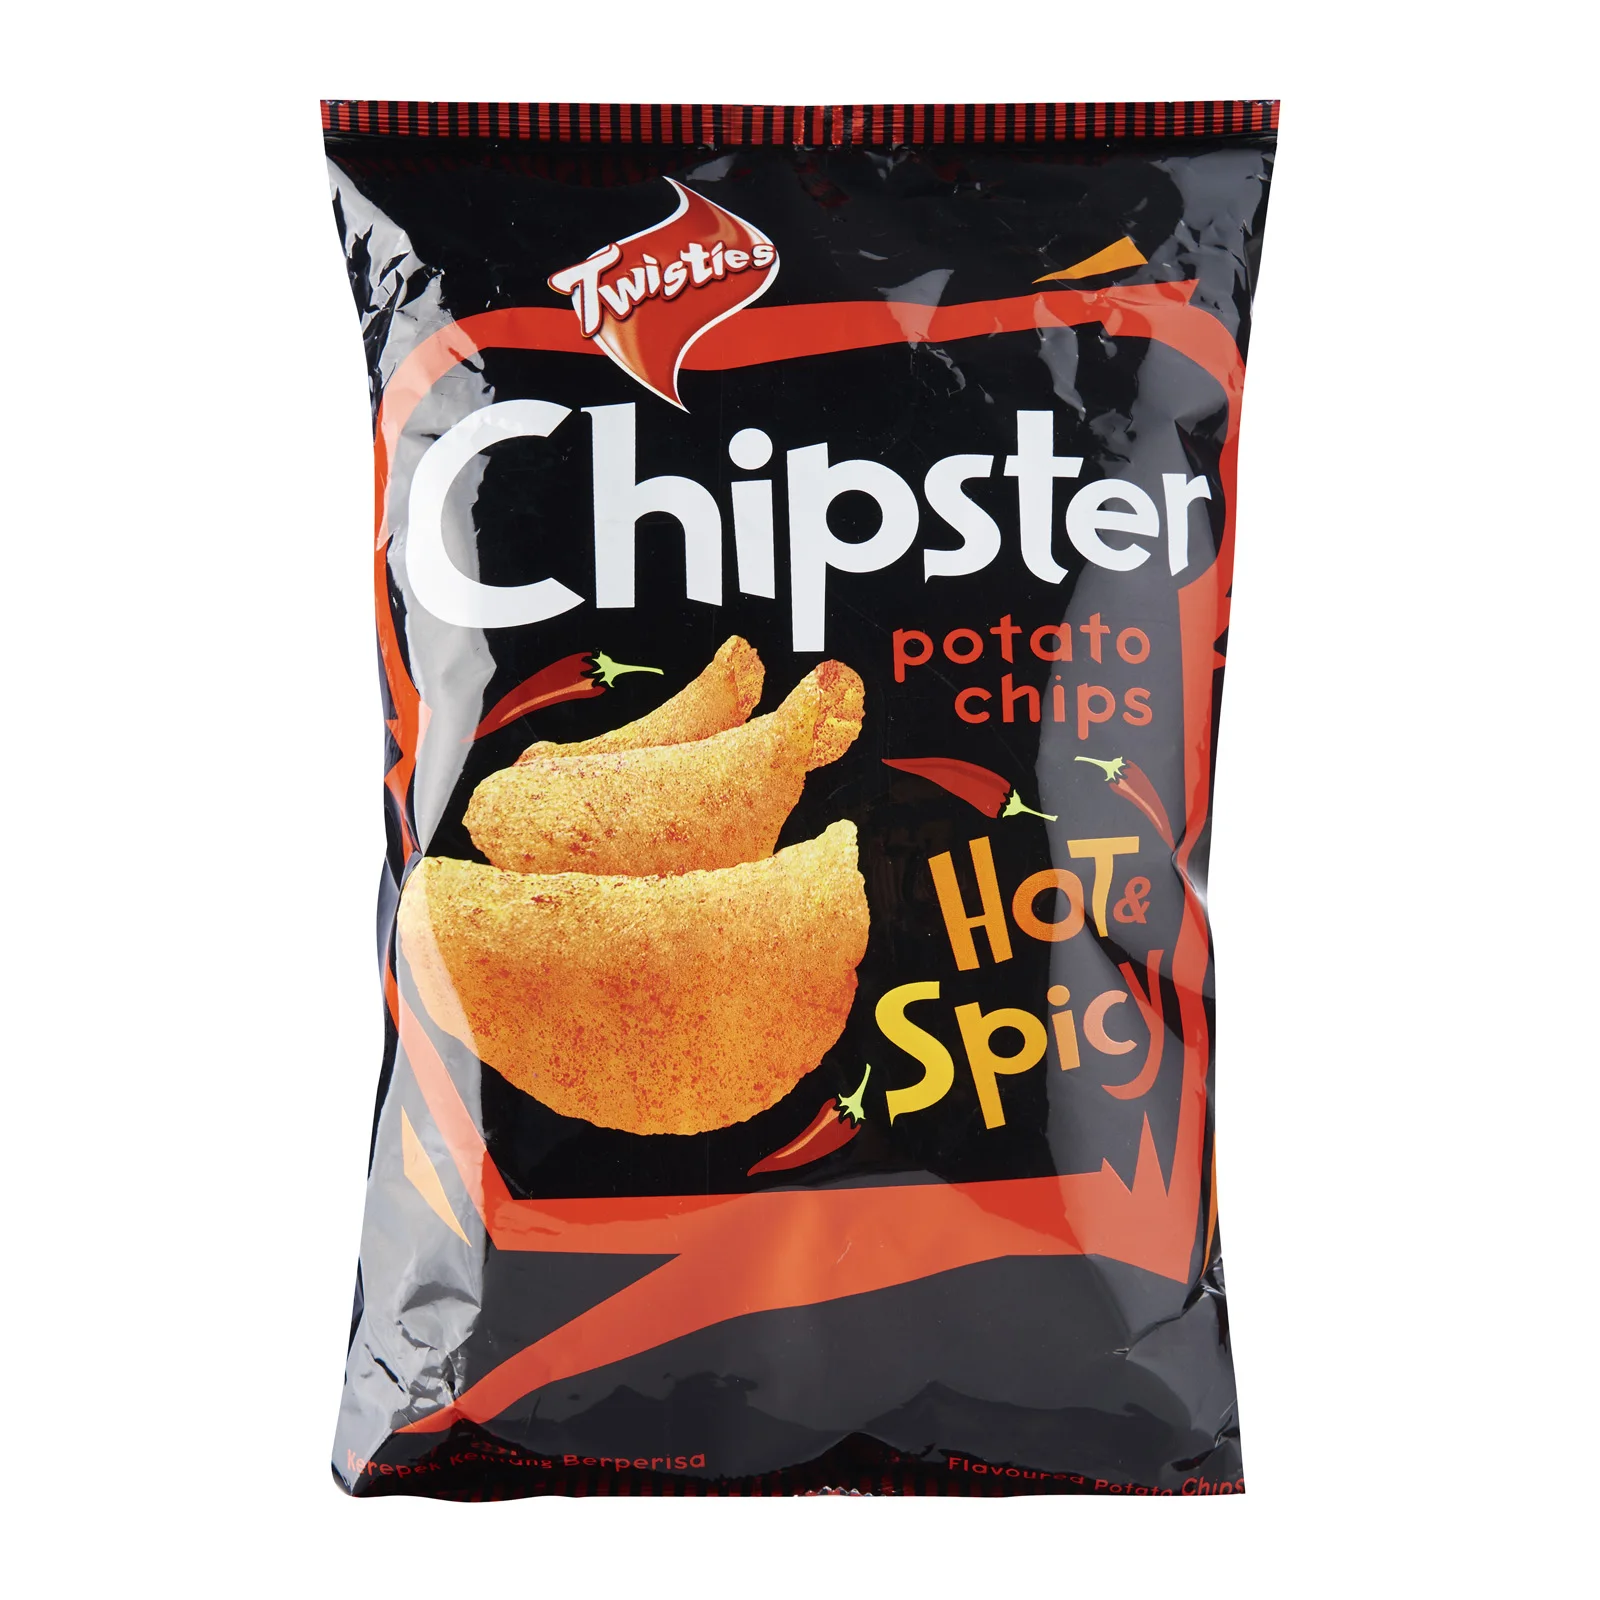 Twisties Chipster Hot And Spicy Flavoured Potato Crisp Chips Malaysia ...